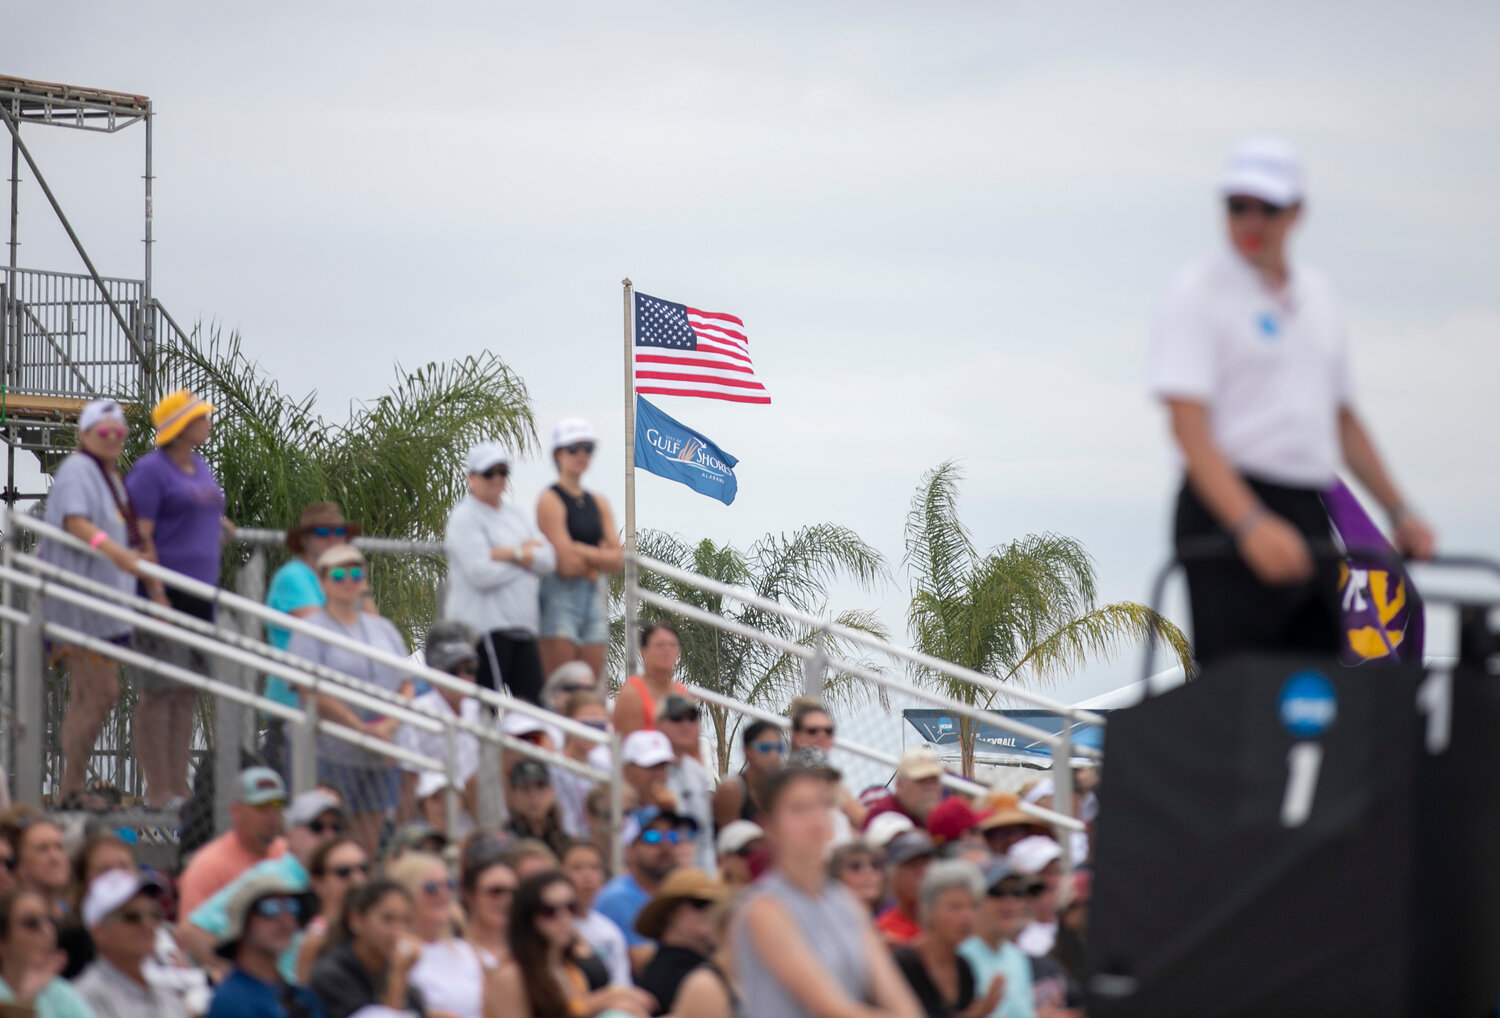 Gulf Place Beach once again hosted the NCAA beach volleyball national championships and once again set attendance records after 11,722 ticketholders took in the action over the three-day tournament in Gulf Shores.